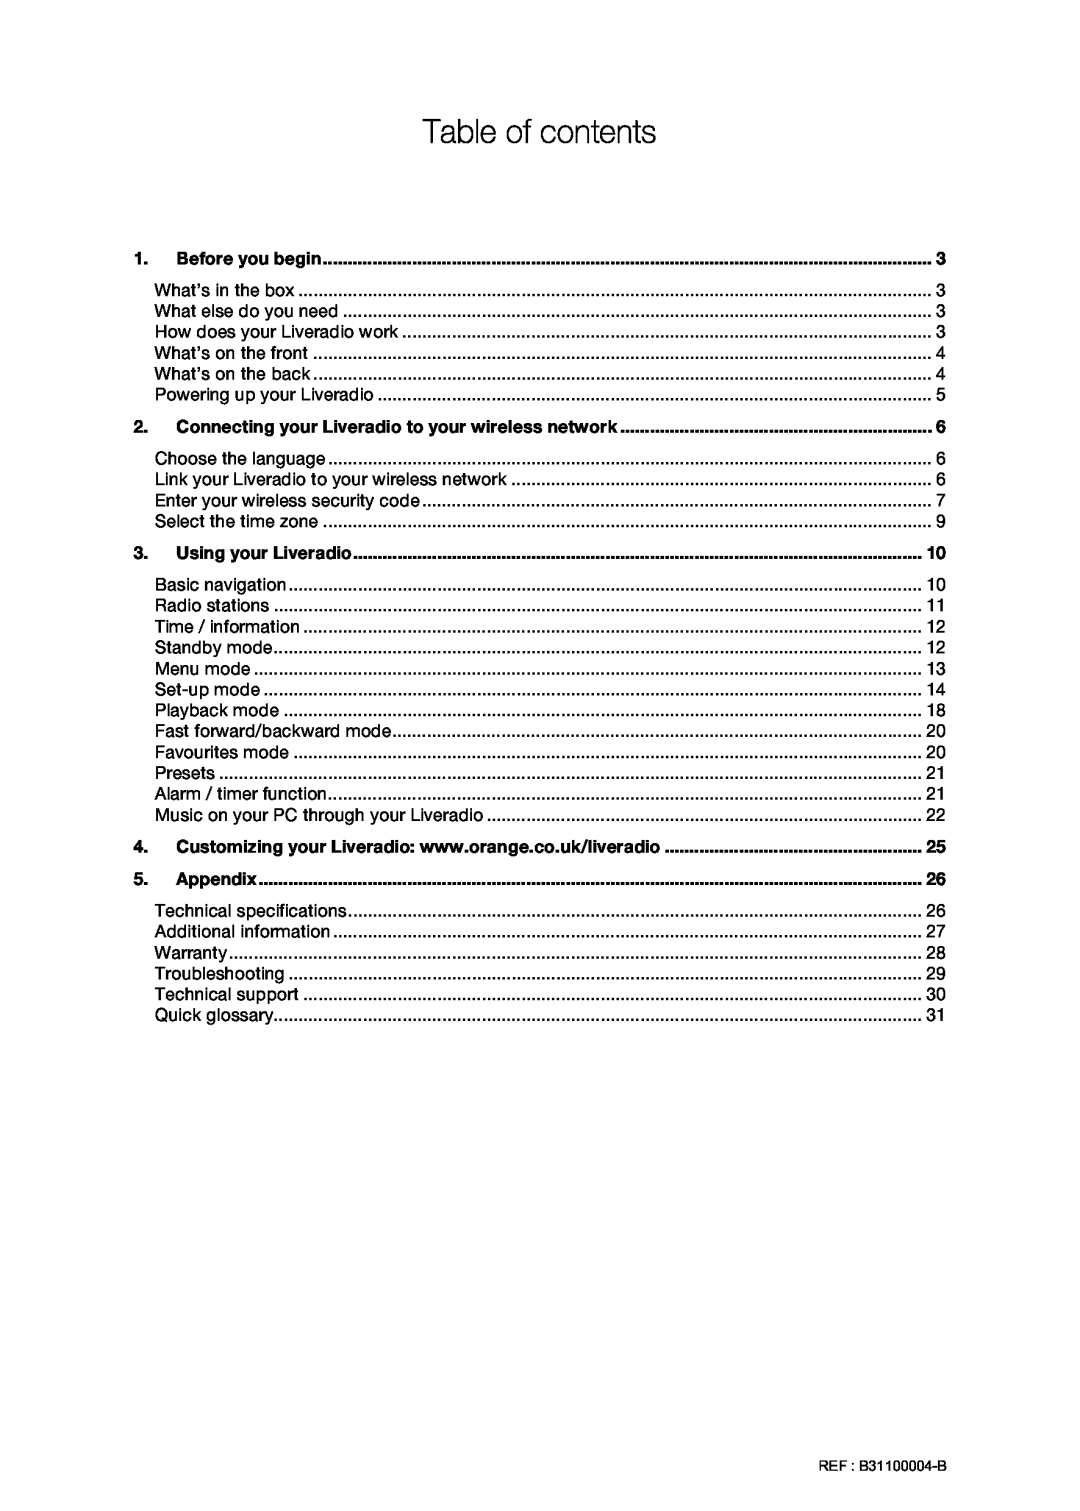 Orange Micro B31100004-B manual Table of contents, Before you begin, Using your Liveradio, Appendix 